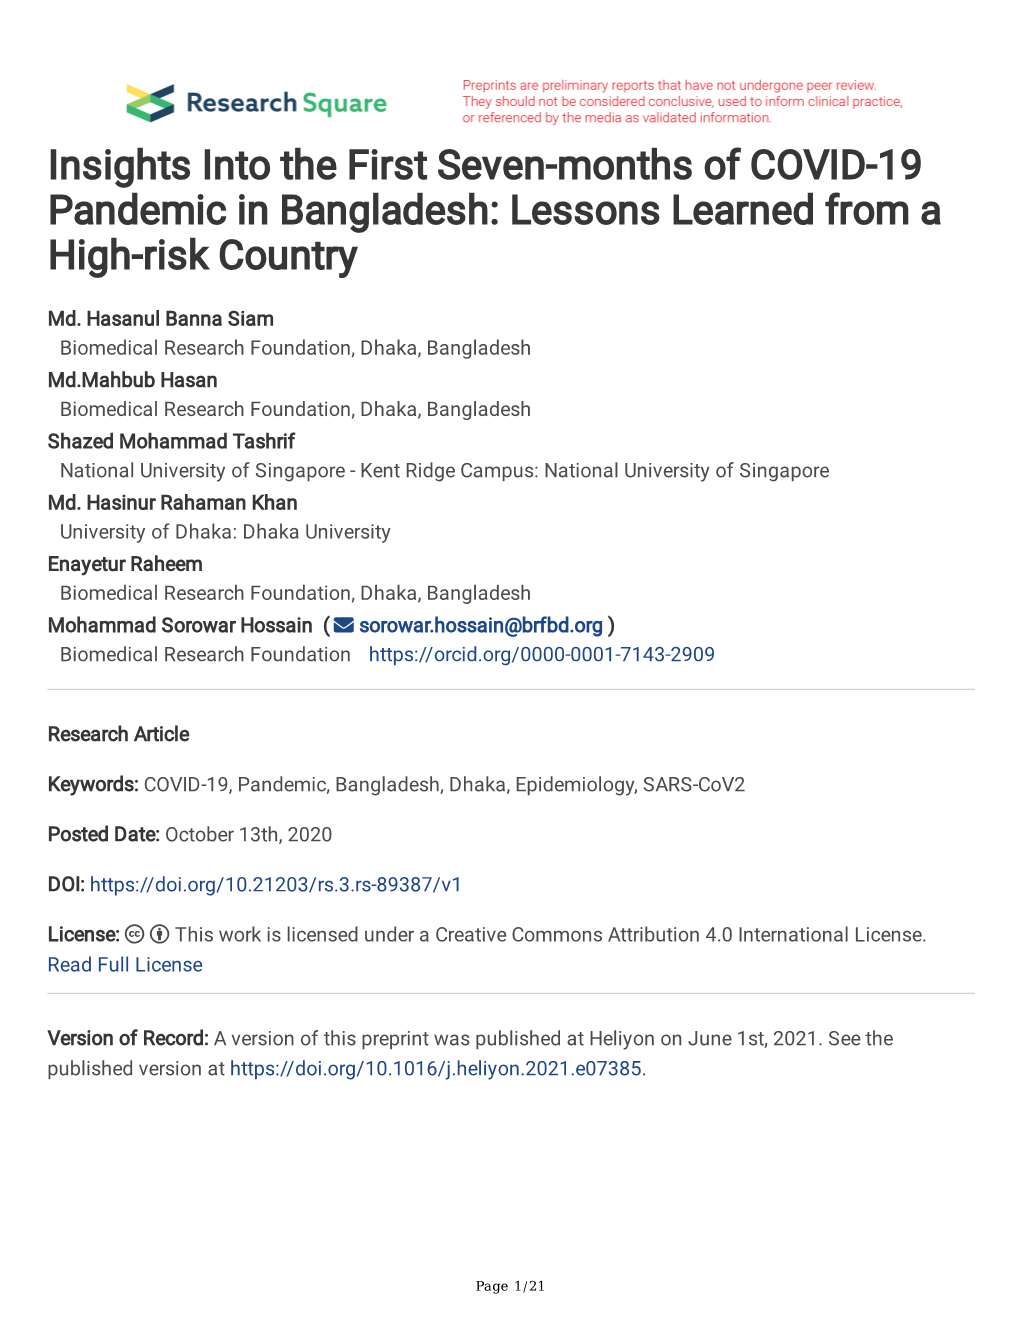 Insights Into the First Seven-Months of COVID-19 Pandemic in Bangladesh: Lessons Learned from a High-Risk Country